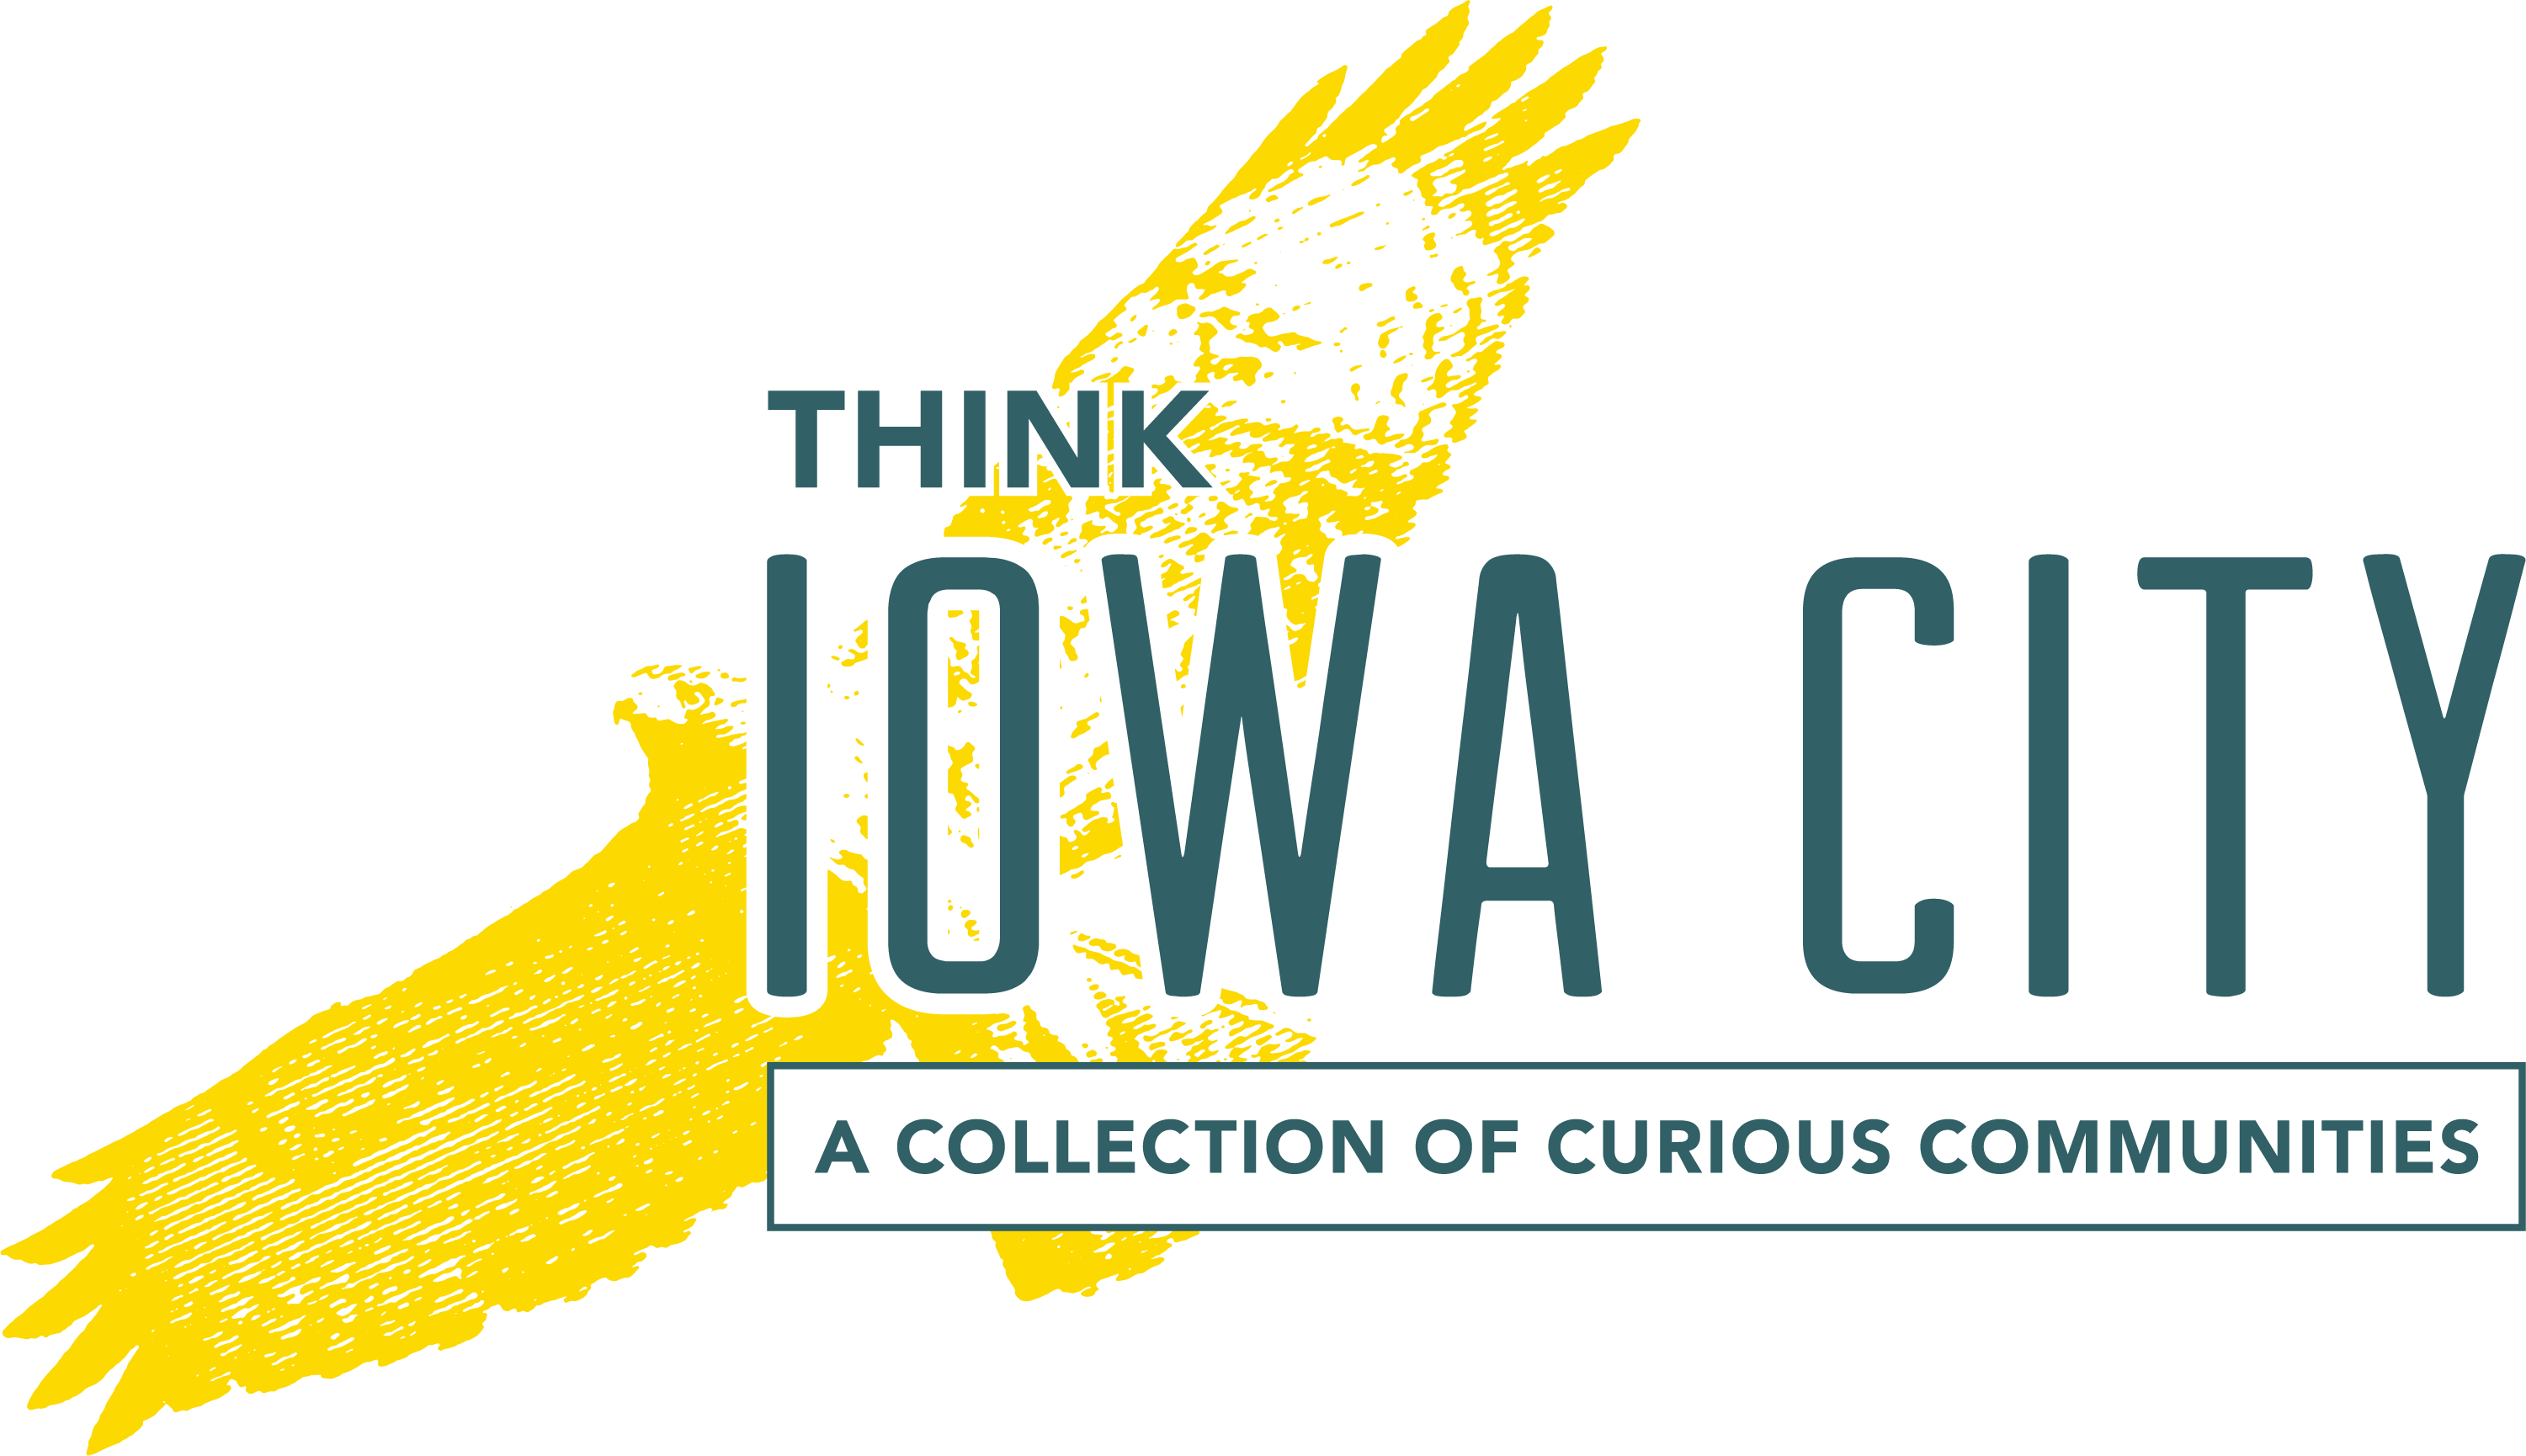 Iowa City: A Collection of Curious Communities